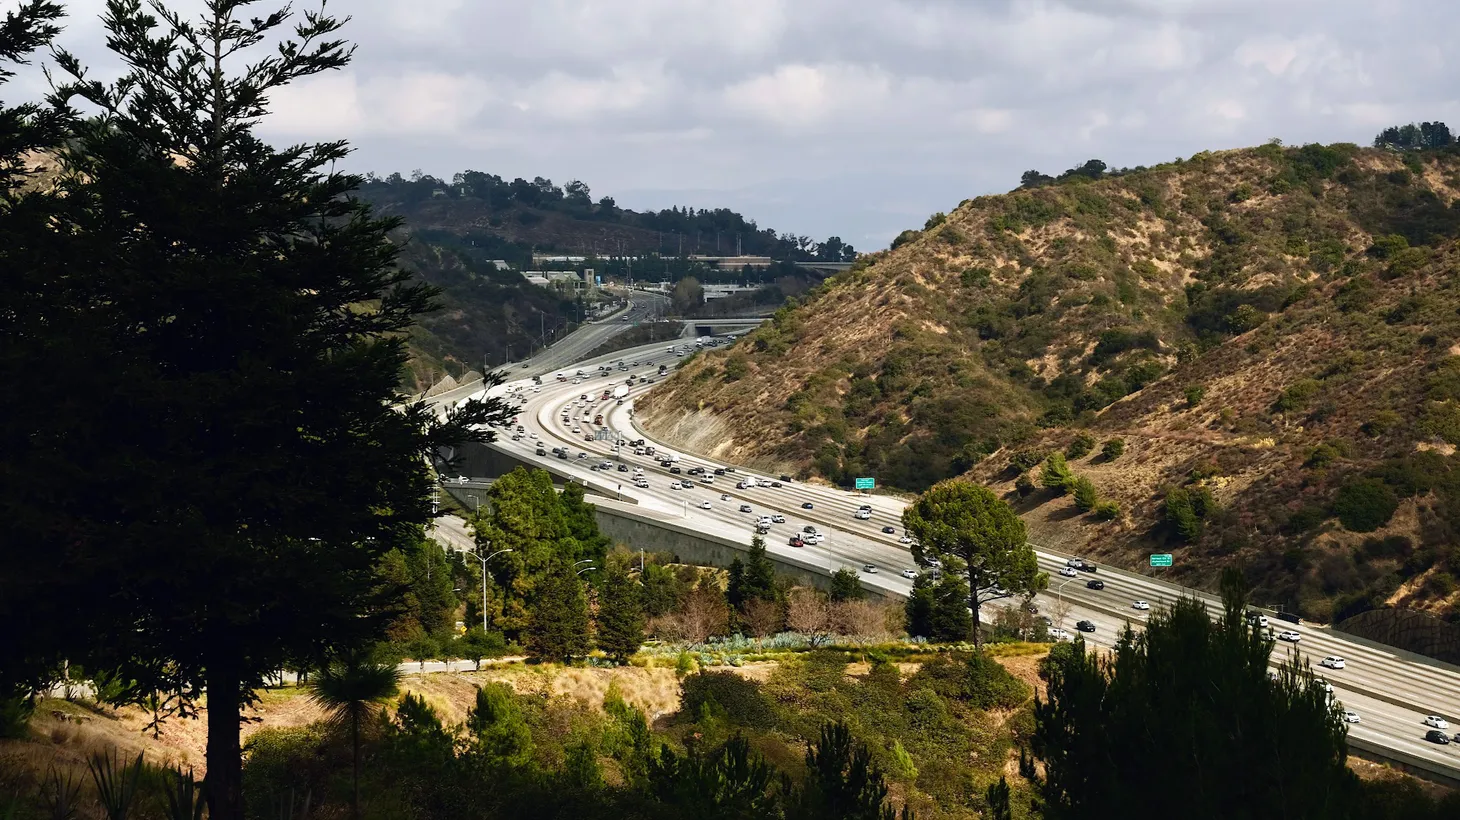 The 405 Sepulveda Pass corridor is one of the busiest stretches of freeway in the nation. Metro is planning a public transit rail option to connect the San Fernando Valley and LA’s west side.